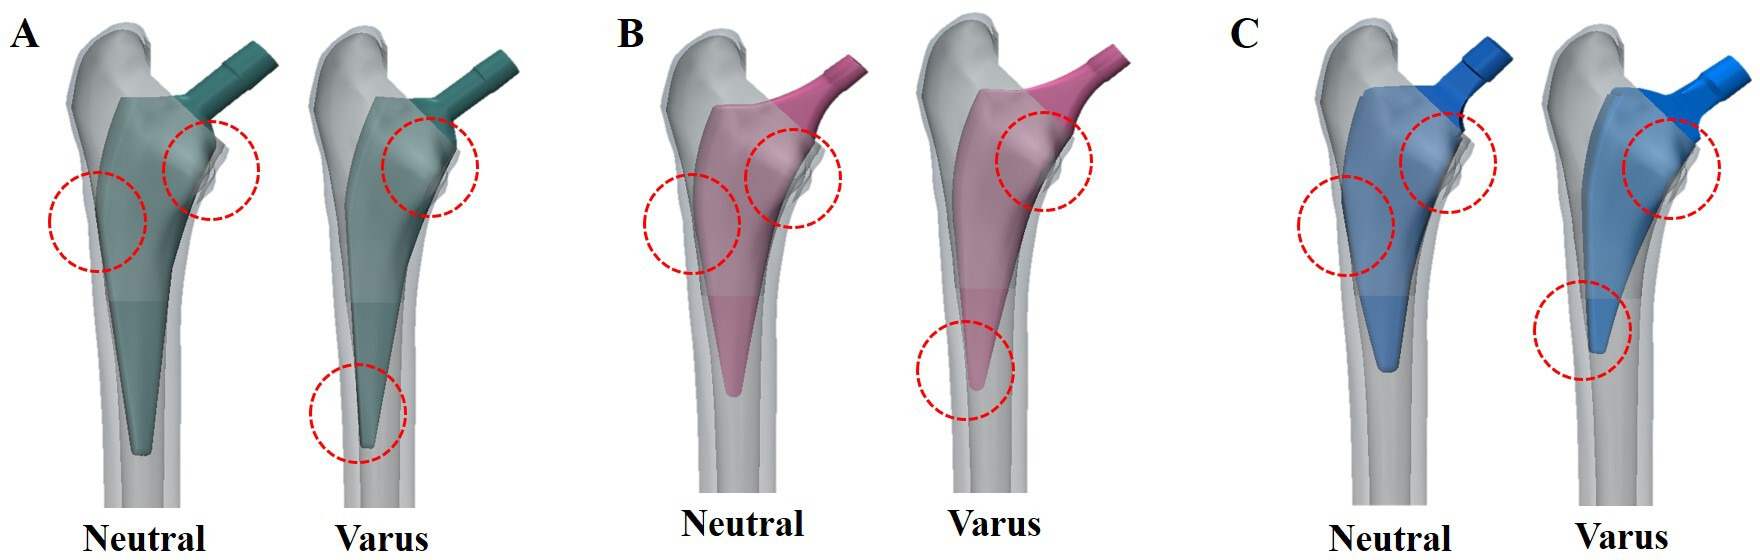 Fig. 1 
            The neutral and varus alignment of stems press-fit within the femoral canal; a) conventional stem, b) mid-short stem, and c) short stem. Dotted circles indicate medial and lateral interfaces in each stem.
          